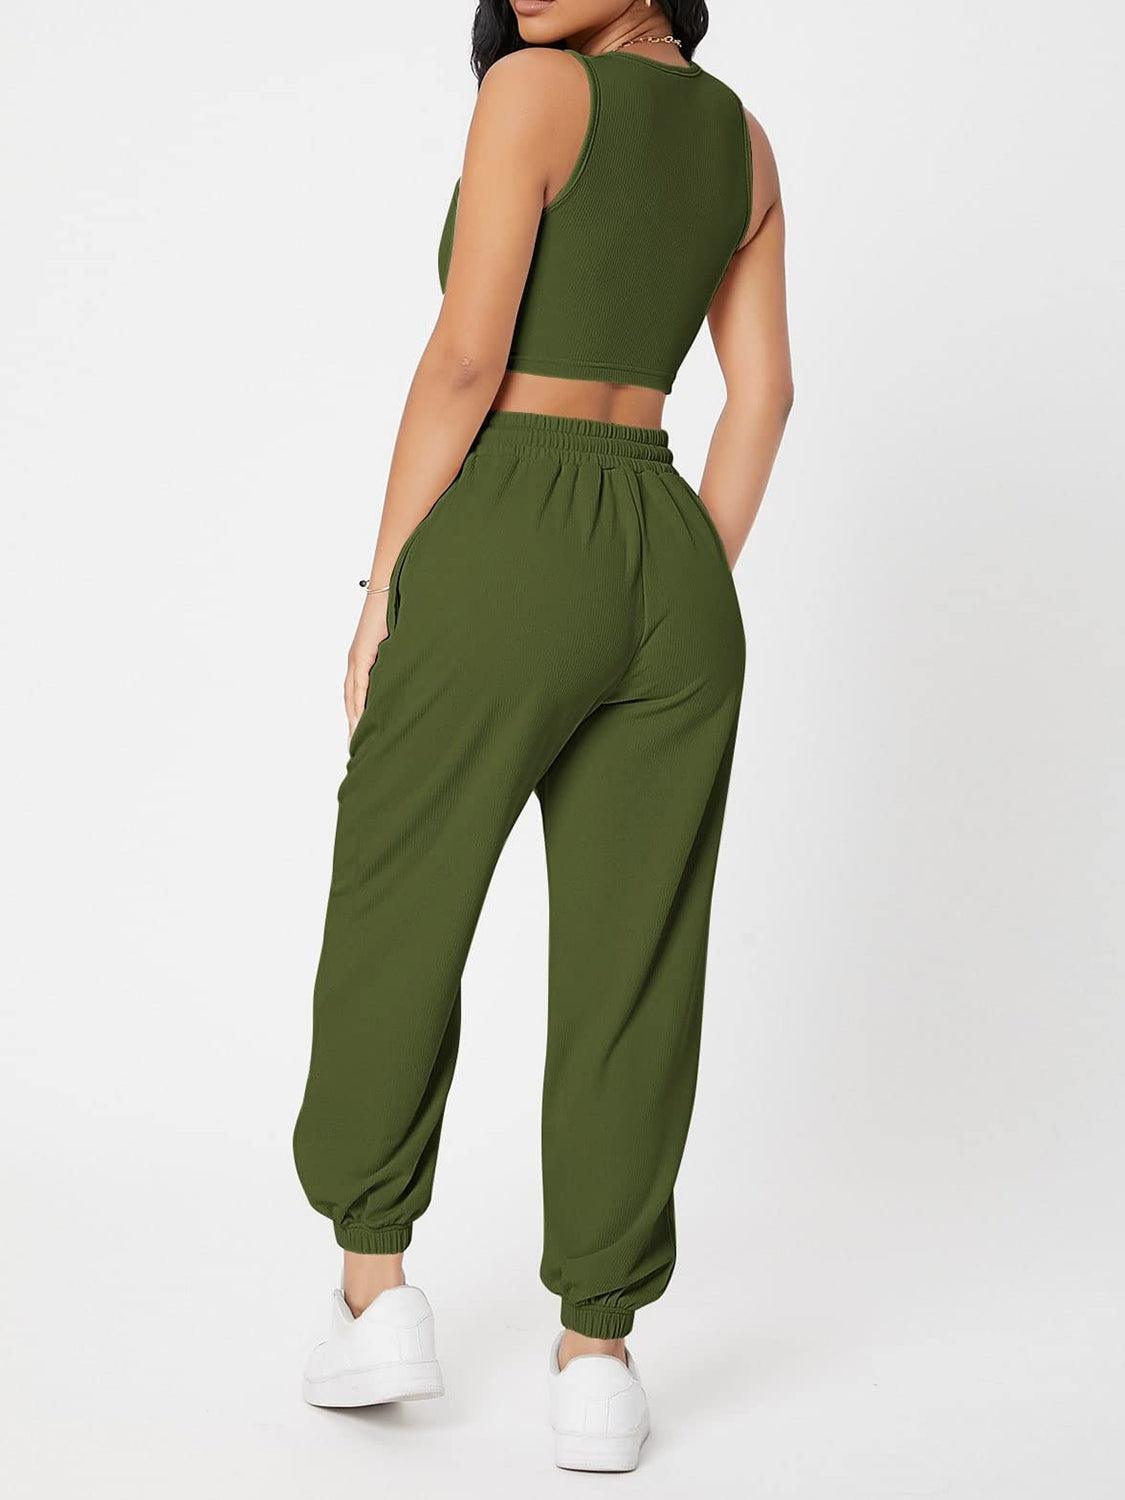 a woman wearing a green crop top and pants